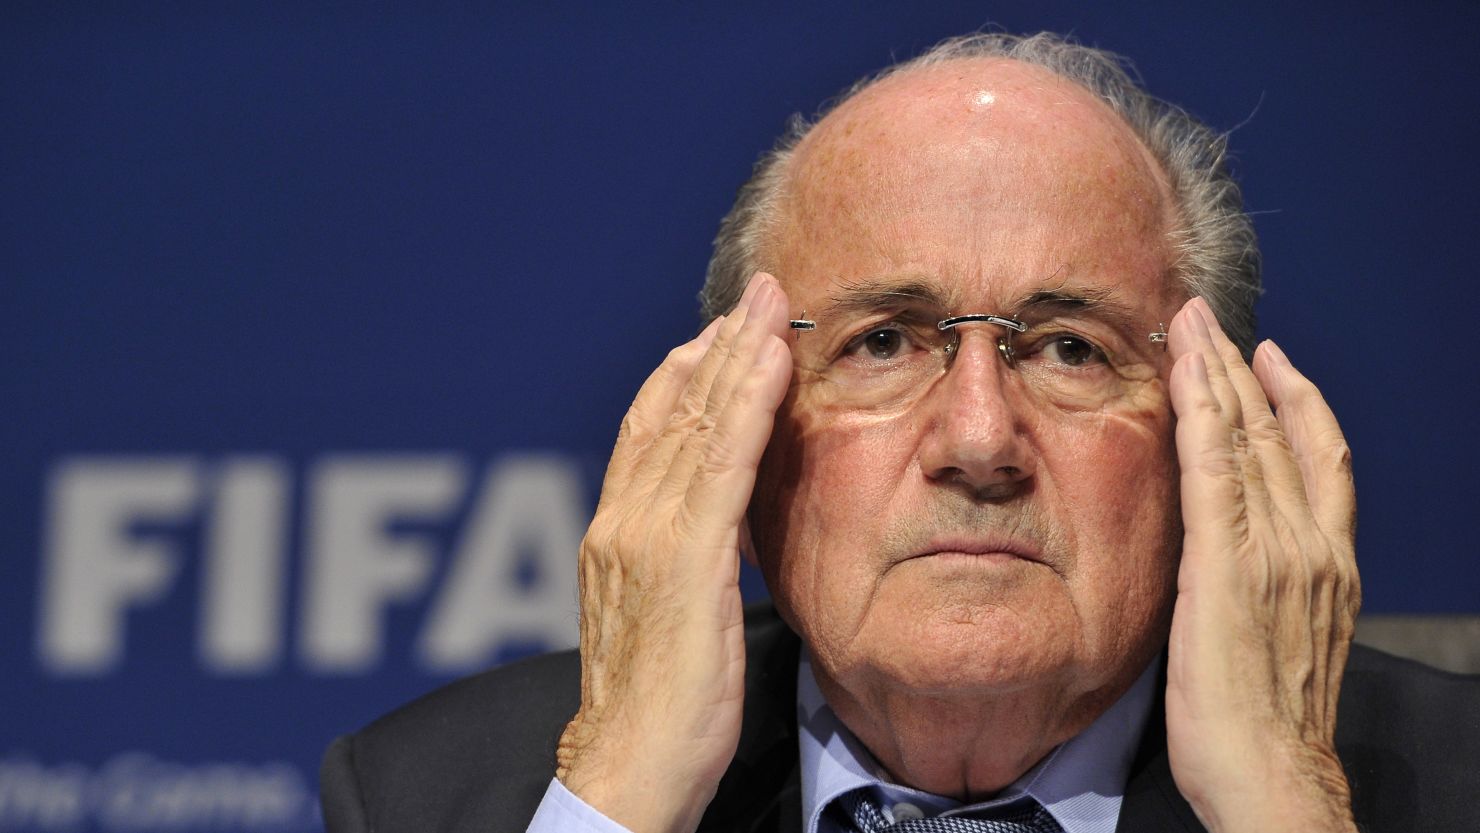 FIFA president Sepp Blatter has called on the football community to rally around Egypt.